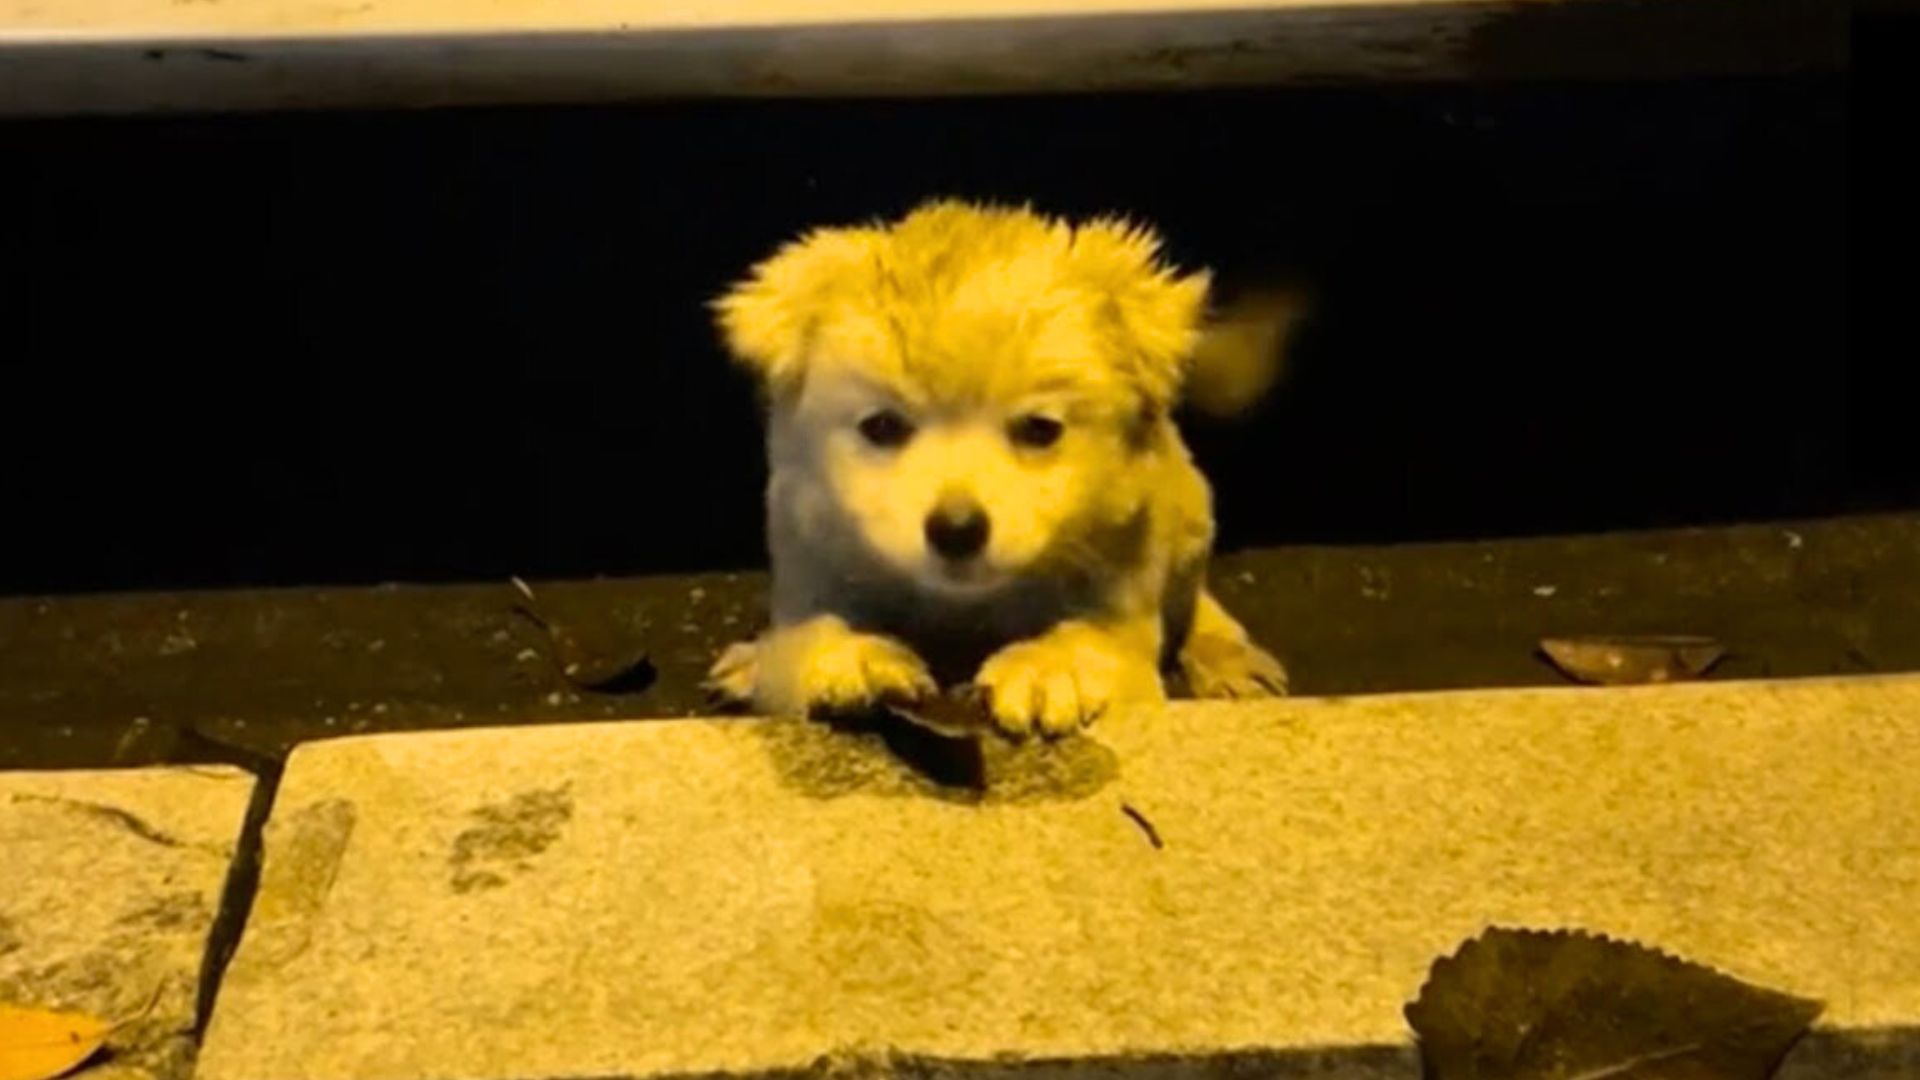 Rescuers Found Sweet Puppy Under A Car And Realized He Was Too Scared To Ask For Help